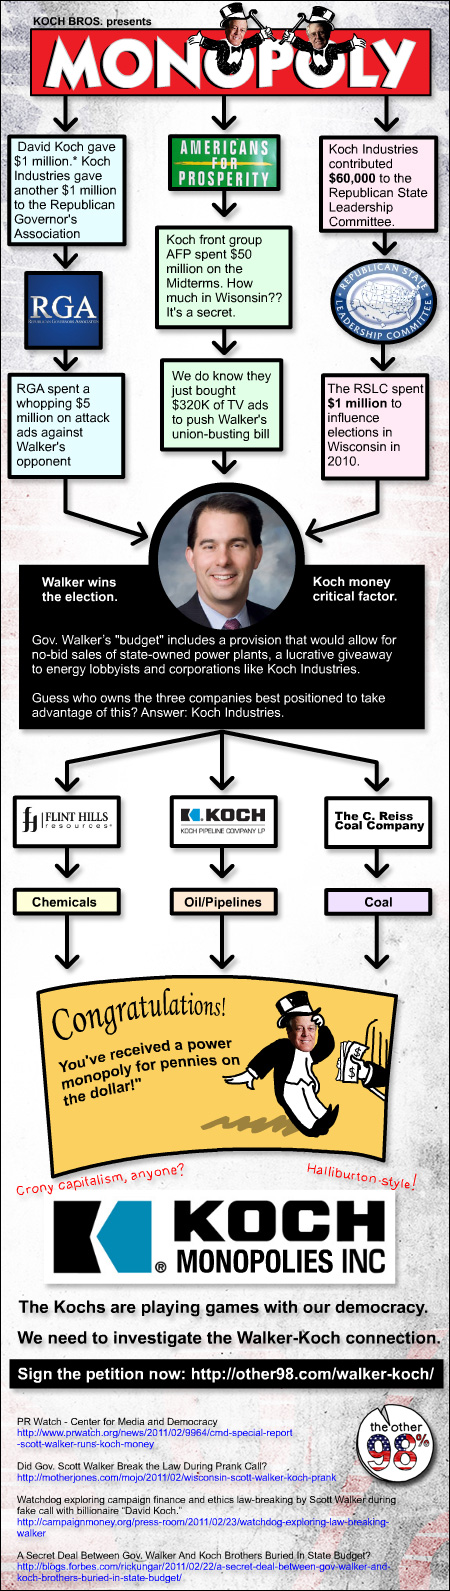 Monopoly: The Koch Bros. Game